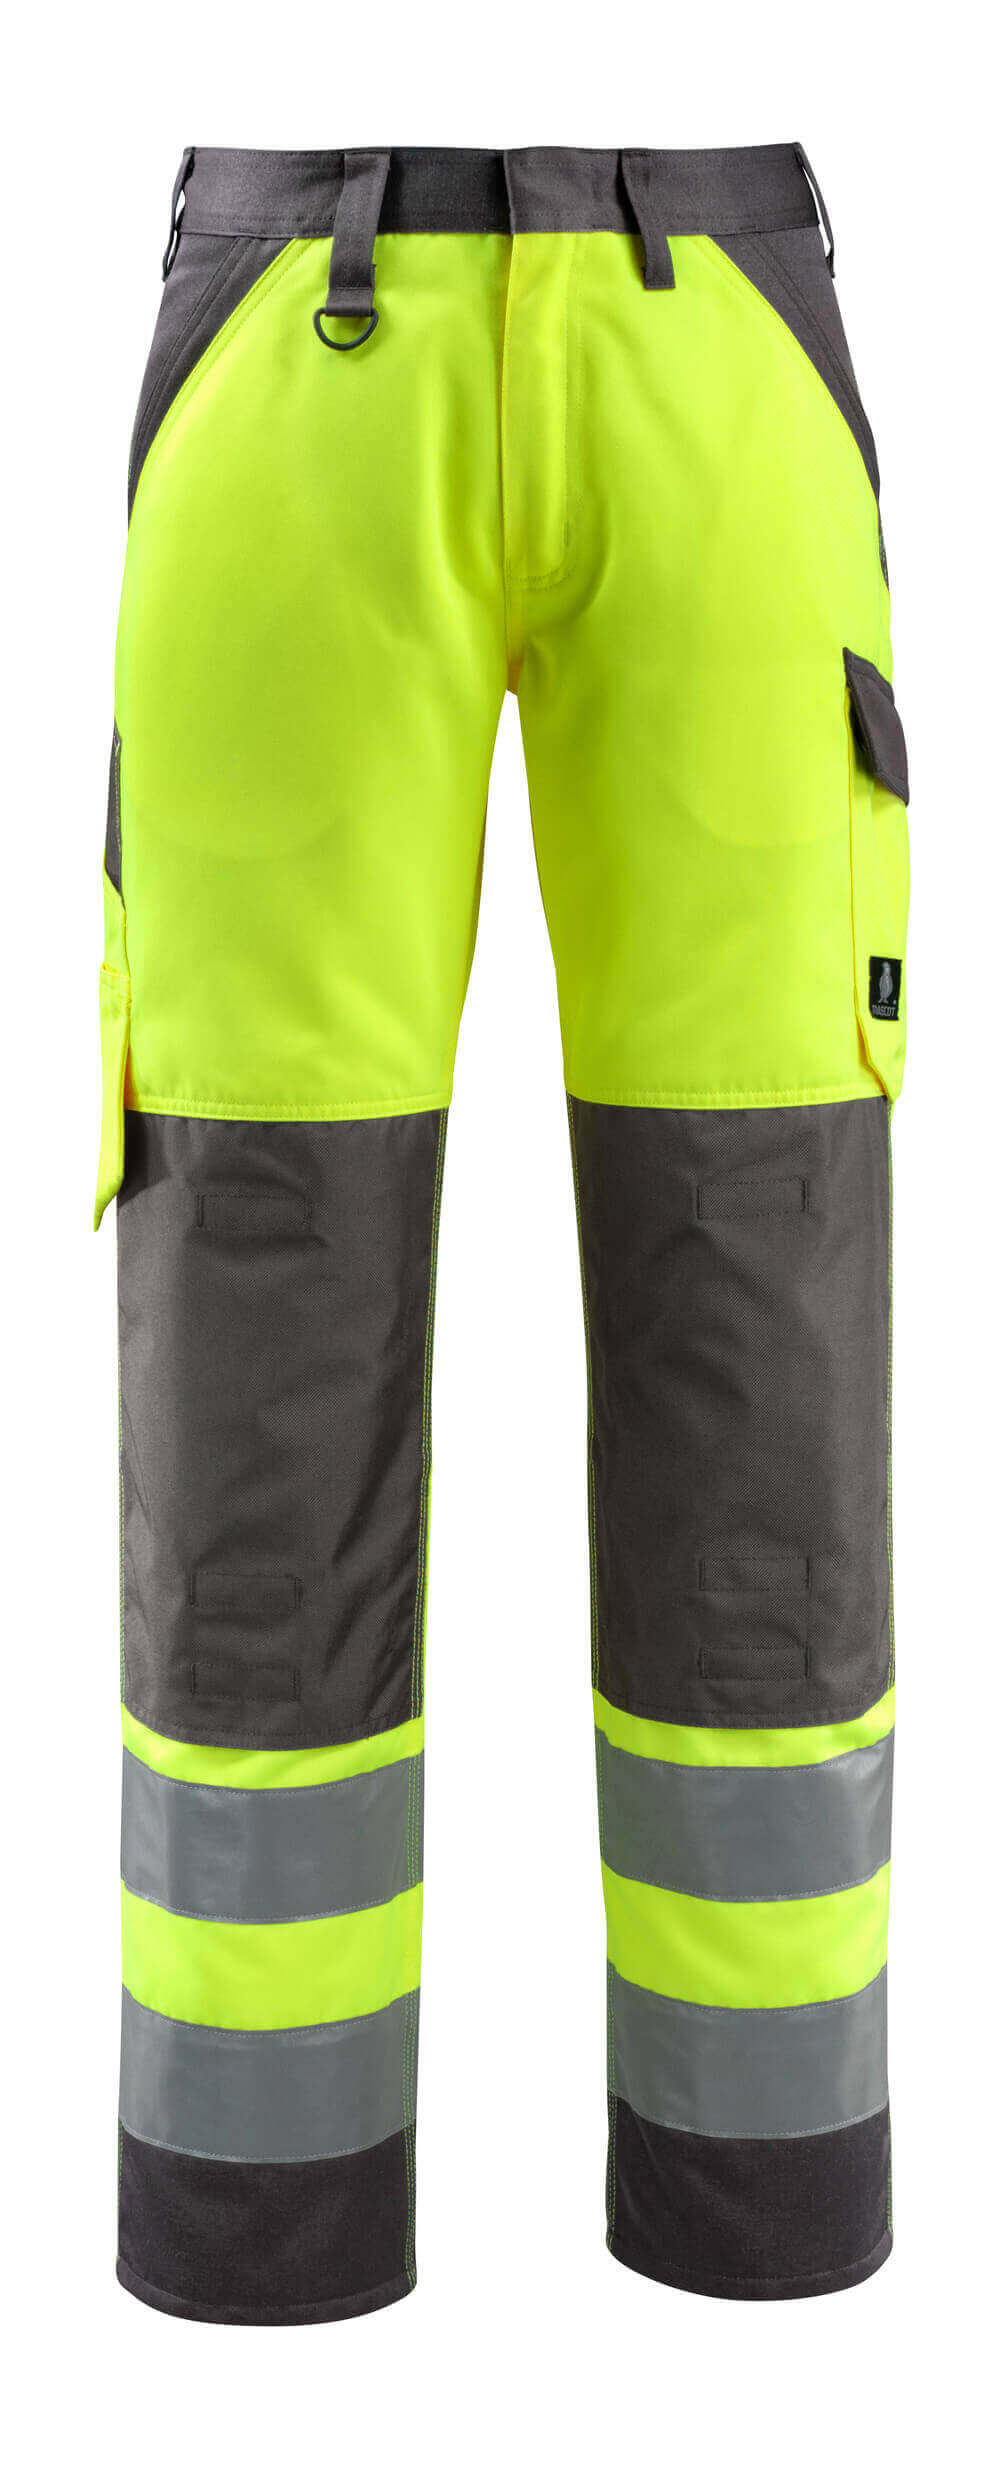 Mascot SAFE LIGHT  Maitland Trousers with kneepad pockets 15979 hi-vis yellow/dark anthracite